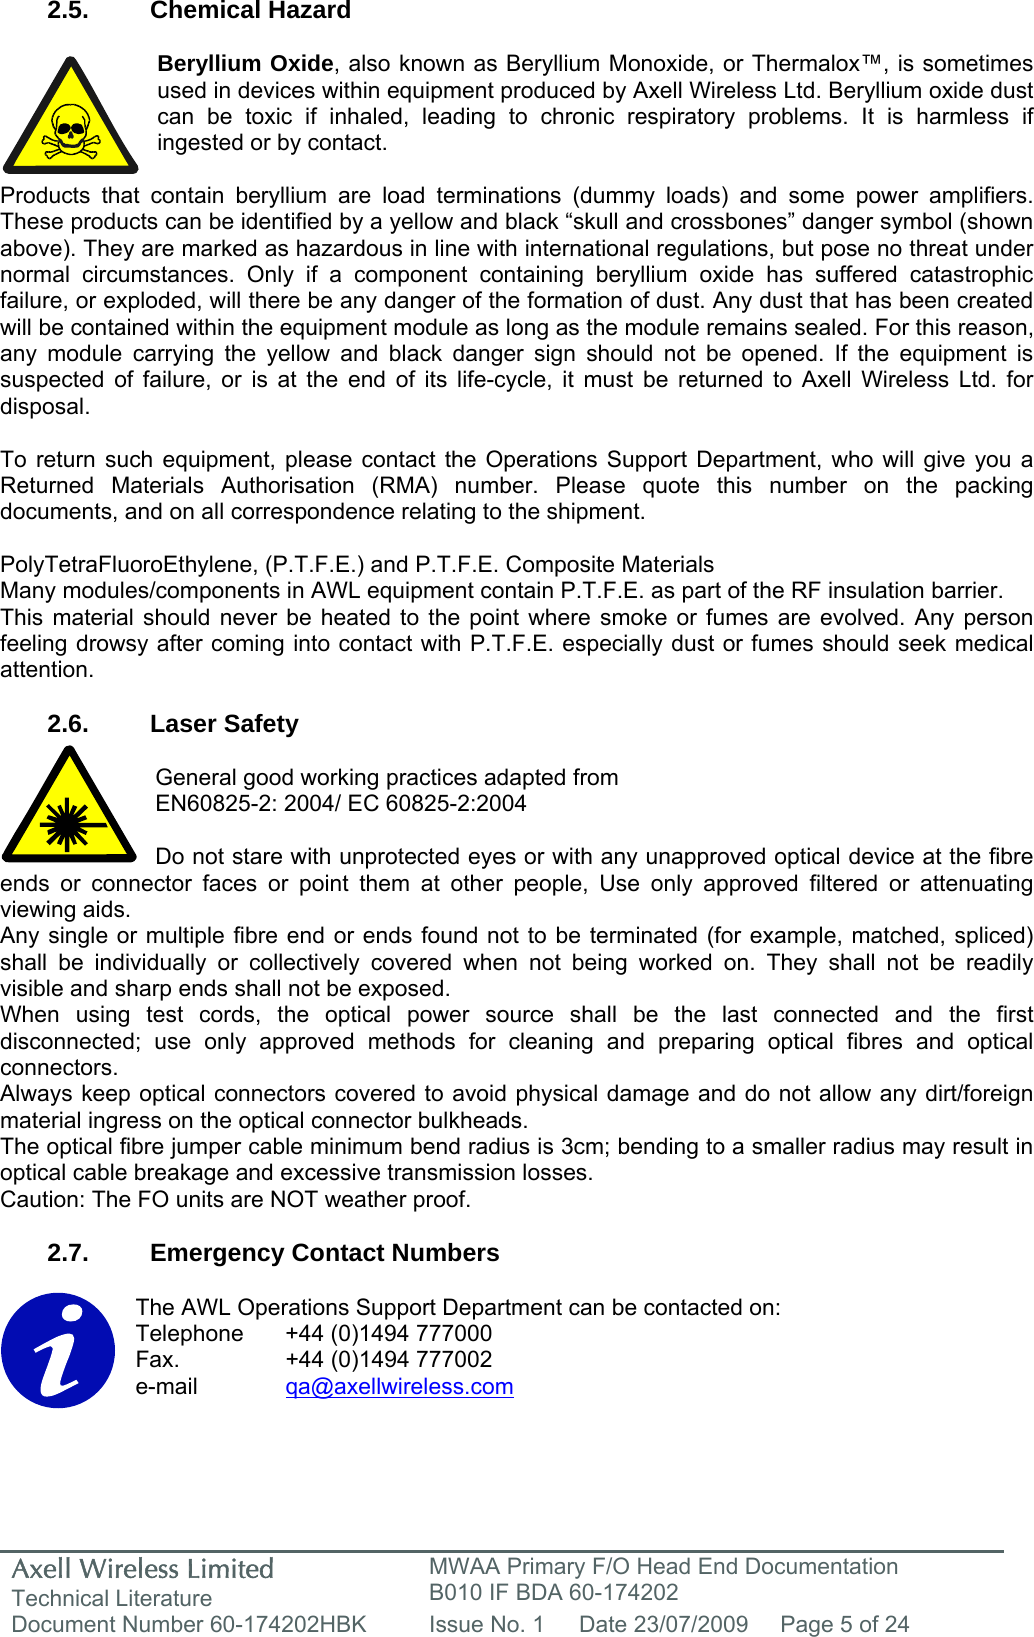 Axell Wireless Limited Technical Literature MWAA Primary F/O Head End Documentation B010 IF BDA 60-174202 Document Number 60-174202HBK  Issue No. 1  Date 23/07/2009  Page 5 of 24   2.5. Chemical Hazard  Beryllium Oxide, also known as Beryllium Monoxide, or Thermalox™, is sometimes used in devices within equipment produced by Axell Wireless Ltd. Beryllium oxide dust can be toxic if inhaled, leading to chronic respiratory problems. It is harmless if ingested or by contact.  Products that contain beryllium are load terminations (dummy loads) and some power amplifiers. These products can be identified by a yellow and black “skull and crossbones” danger symbol (shown above). They are marked as hazardous in line with international regulations, but pose no threat under normal circumstances. Only if a component containing beryllium oxide has suffered catastrophic failure, or exploded, will there be any danger of the formation of dust. Any dust that has been created will be contained within the equipment module as long as the module remains sealed. For this reason, any module carrying the yellow and black danger sign should not be opened. If the equipment is suspected of failure, or is at the end of its life-cycle, it must be returned to Axell Wireless Ltd. for disposal.  To return such equipment, please contact the Operations Support Department, who will give you a Returned Materials Authorisation (RMA) number. Please quote this number on the packing documents, and on all correspondence relating to the shipment.  PolyTetraFluoroEthylene, (P.T.F.E.) and P.T.F.E. Composite Materials Many modules/components in AWL equipment contain P.T.F.E. as part of the RF insulation barrier. This material should never be heated to the point where smoke or fumes are evolved. Any person feeling drowsy after coming into contact with P.T.F.E. especially dust or fumes should seek medical attention.  2.6. Laser Safety  General good working practices adapted from EN60825-2: 2004/ EC 60825-2:2004  Do not stare with unprotected eyes or with any unapproved optical device at the fibre ends or connector faces or point them at other people, Use only approved filtered or attenuating viewing aids. Any single or multiple fibre end or ends found not to be terminated (for example, matched, spliced) shall be individually or collectively covered when not being worked on. They shall not be readily visible and sharp ends shall not be exposed. When using test cords, the optical power source shall be the last connected and the first disconnected; use only approved methods for cleaning and preparing optical fibres and optical connectors. Always keep optical connectors covered to avoid physical damage and do not allow any dirt/foreign material ingress on the optical connector bulkheads. The optical fibre jumper cable minimum bend radius is 3cm; bending to a smaller radius may result in optical cable breakage and excessive transmission losses. Caution: The FO units are NOT weather proof.  2.7.  Emergency Contact Numbers  The AWL Operations Support Department can be contacted on: Telephone   +44 (0)1494 777000 Fax.    +44 (0)1494 777002 e-mail   qa@axellwireless.com    